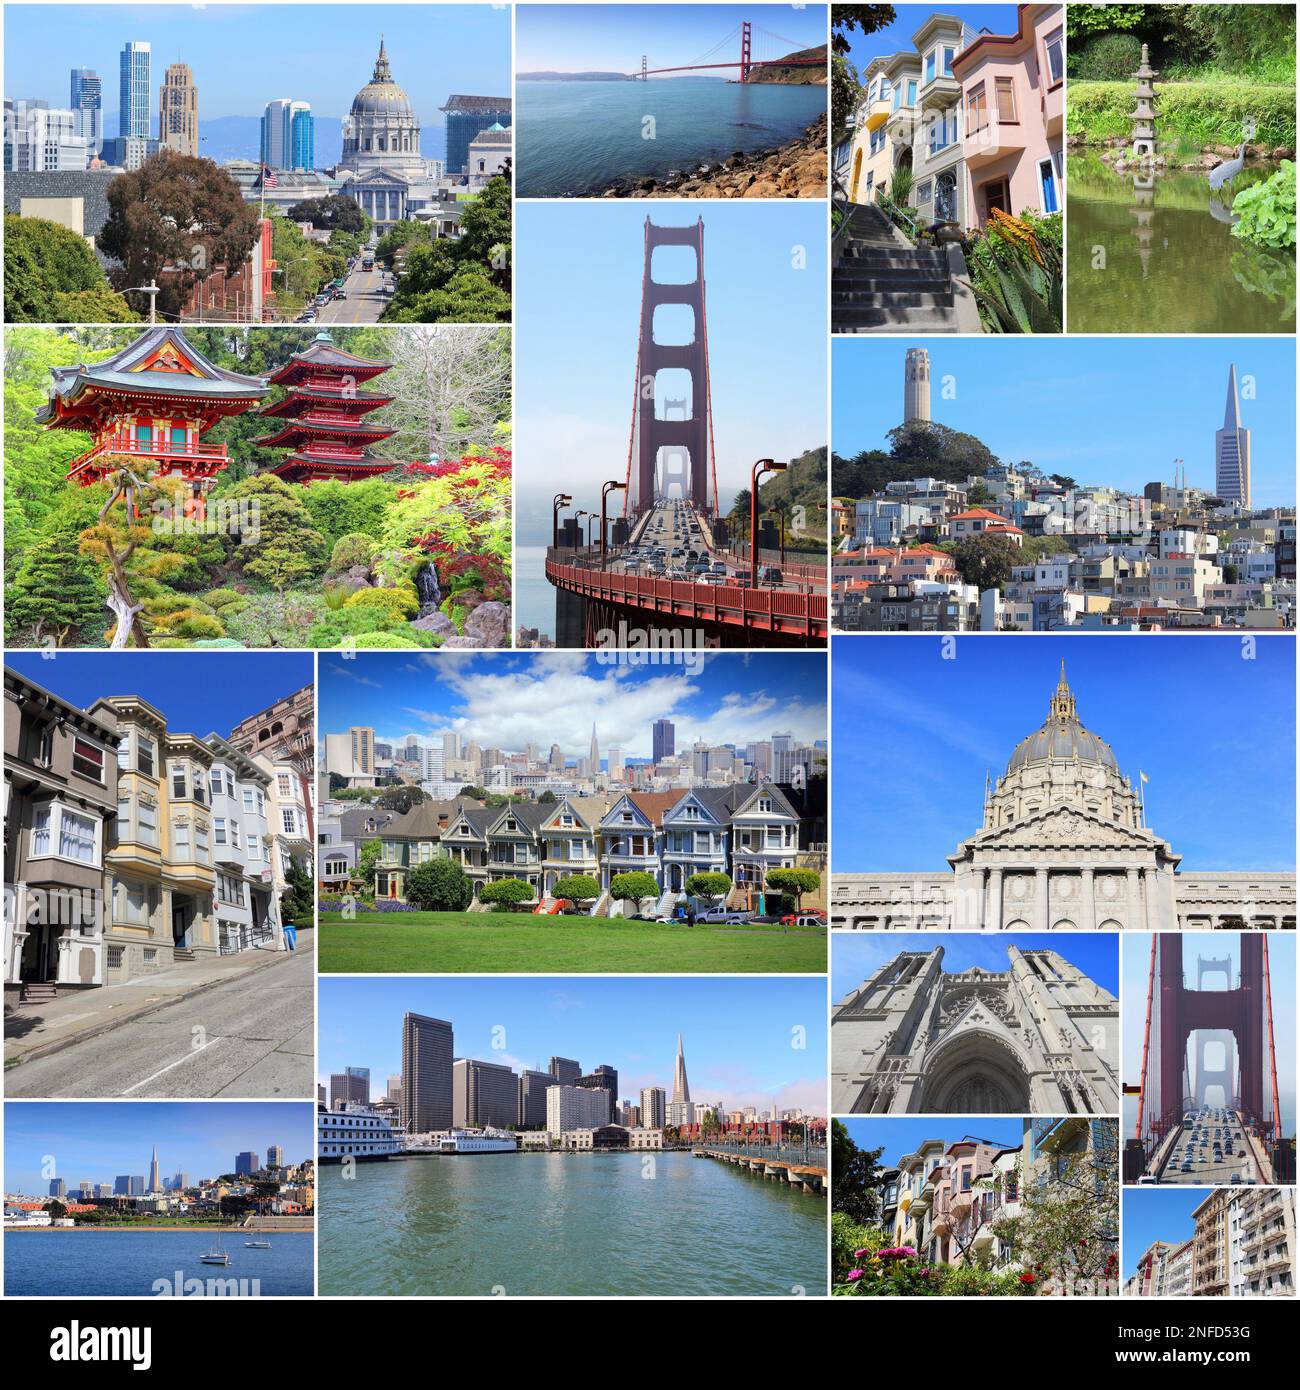 San Francisco collage - photo collection with Nob Hill, Telegraph Hill, Grace Cathedral and Golden Gate Bridge. Stock Photo